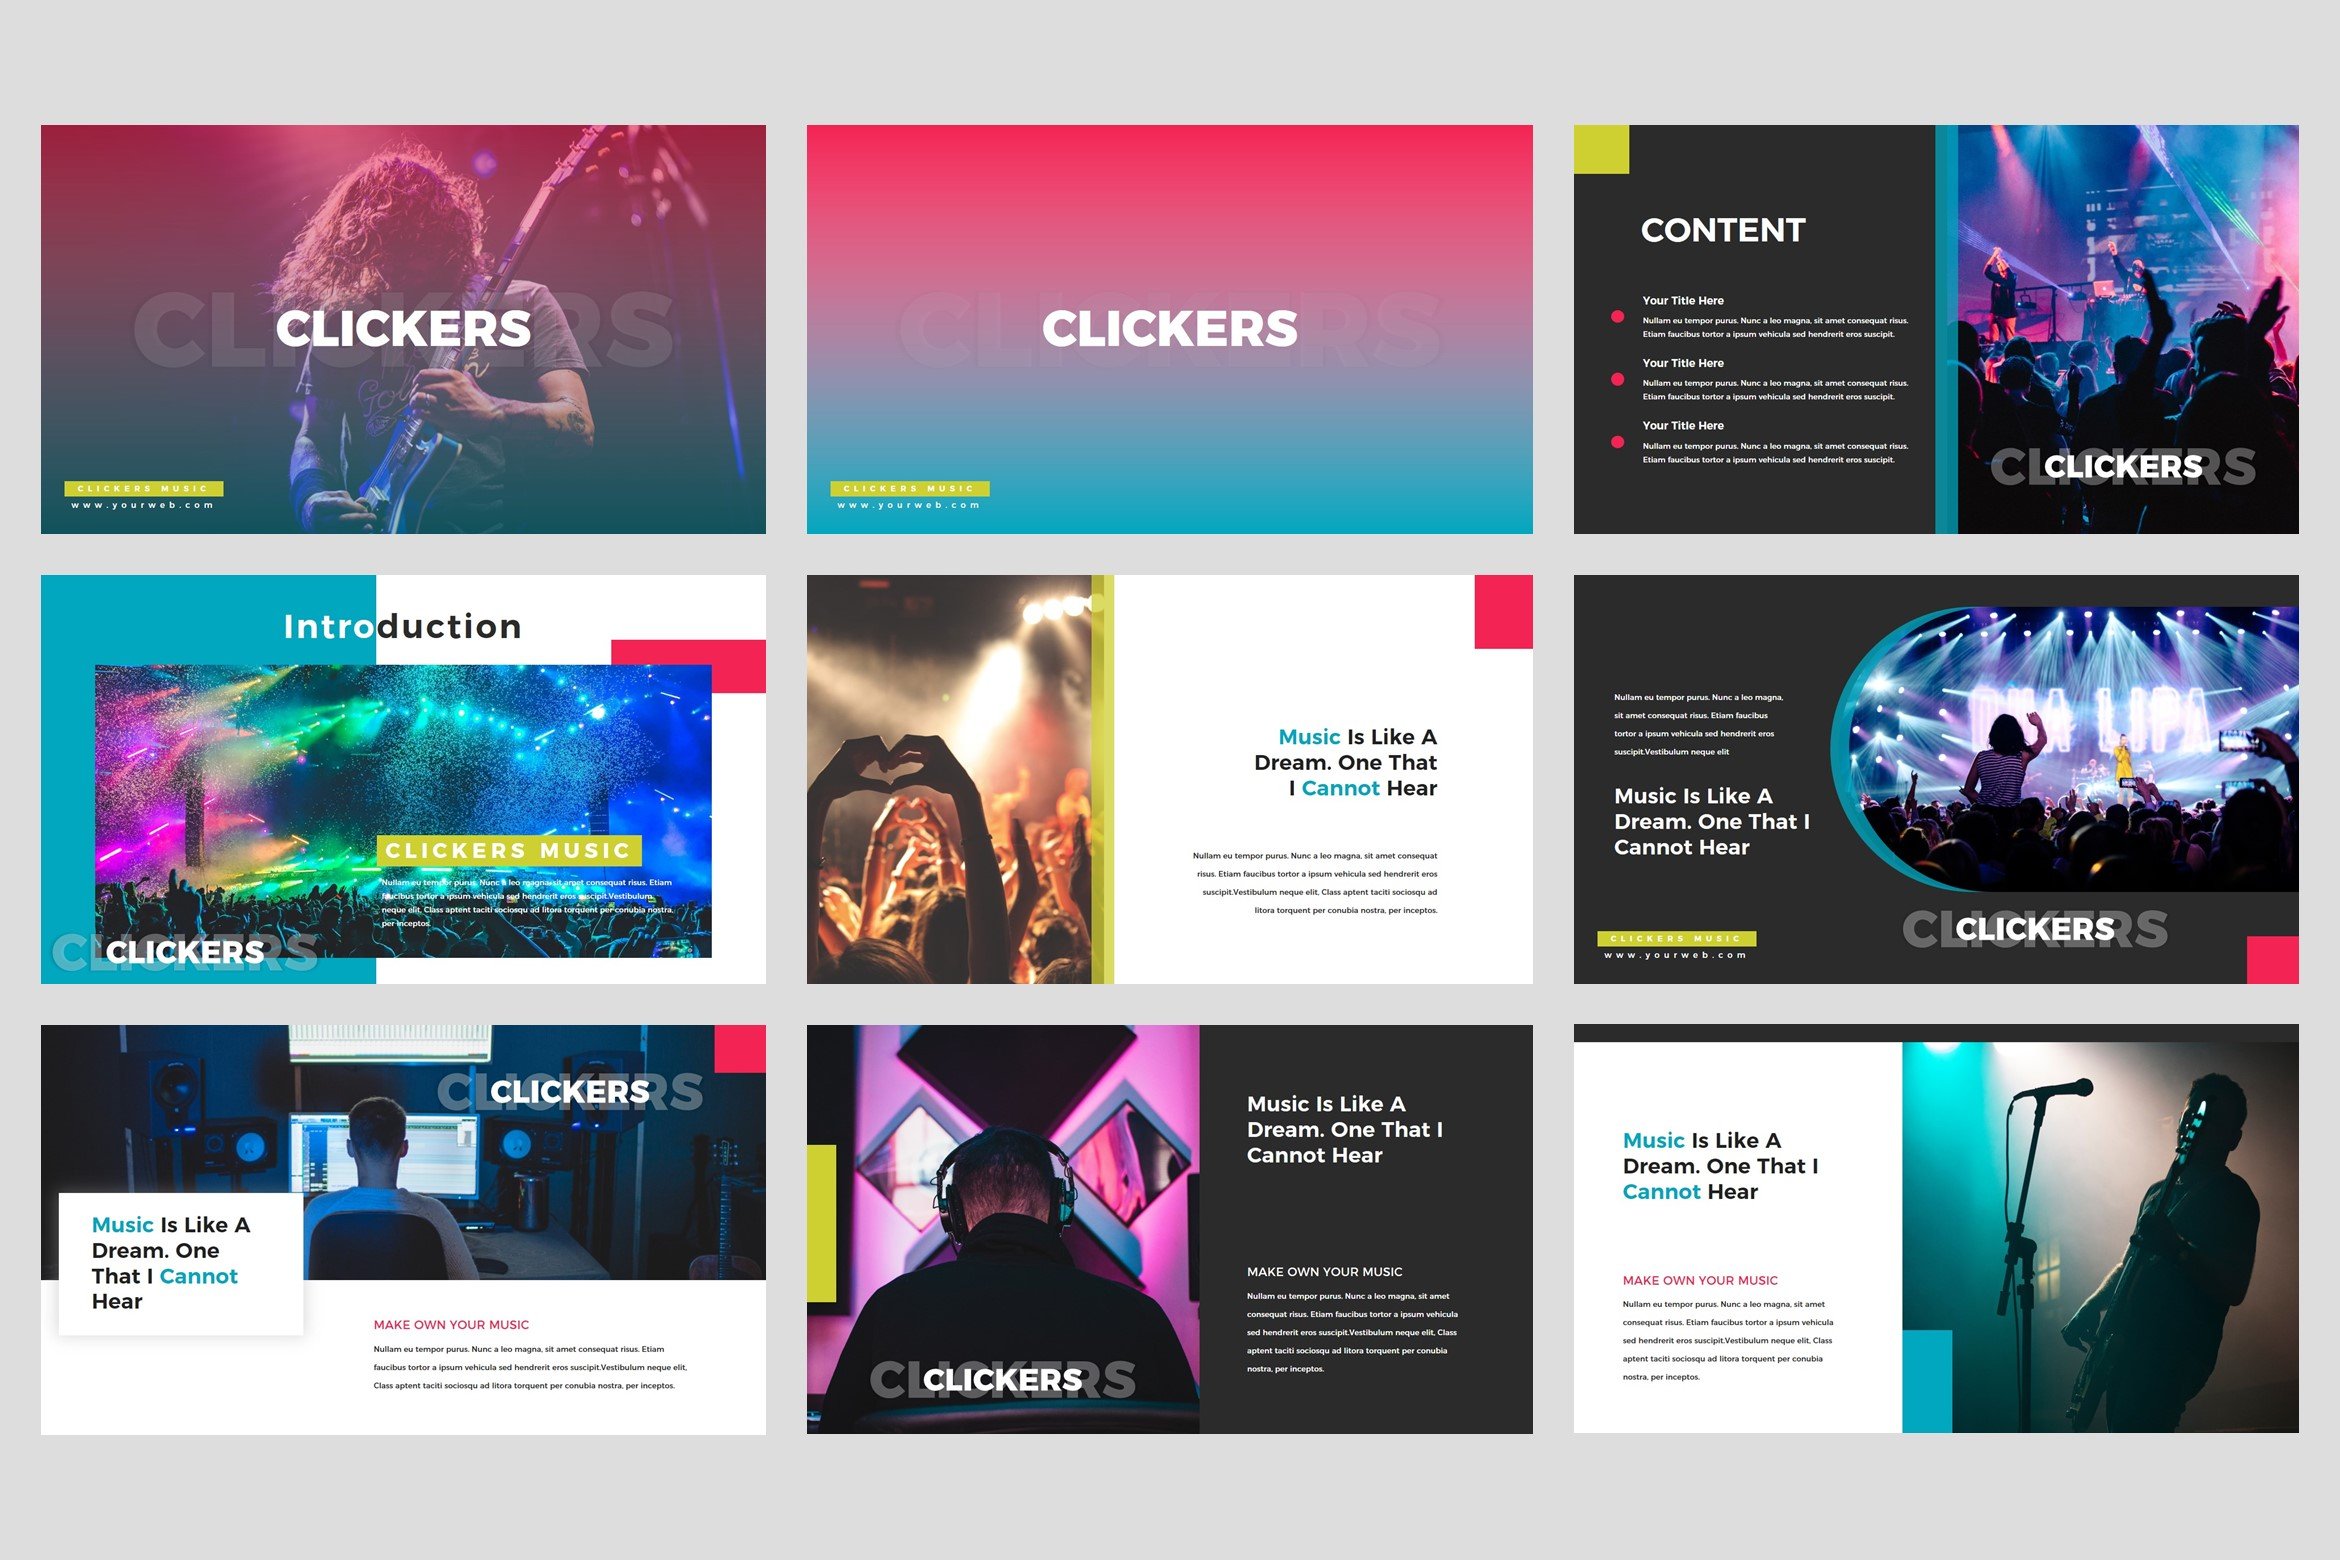 This template has a colorful design with creative slides.